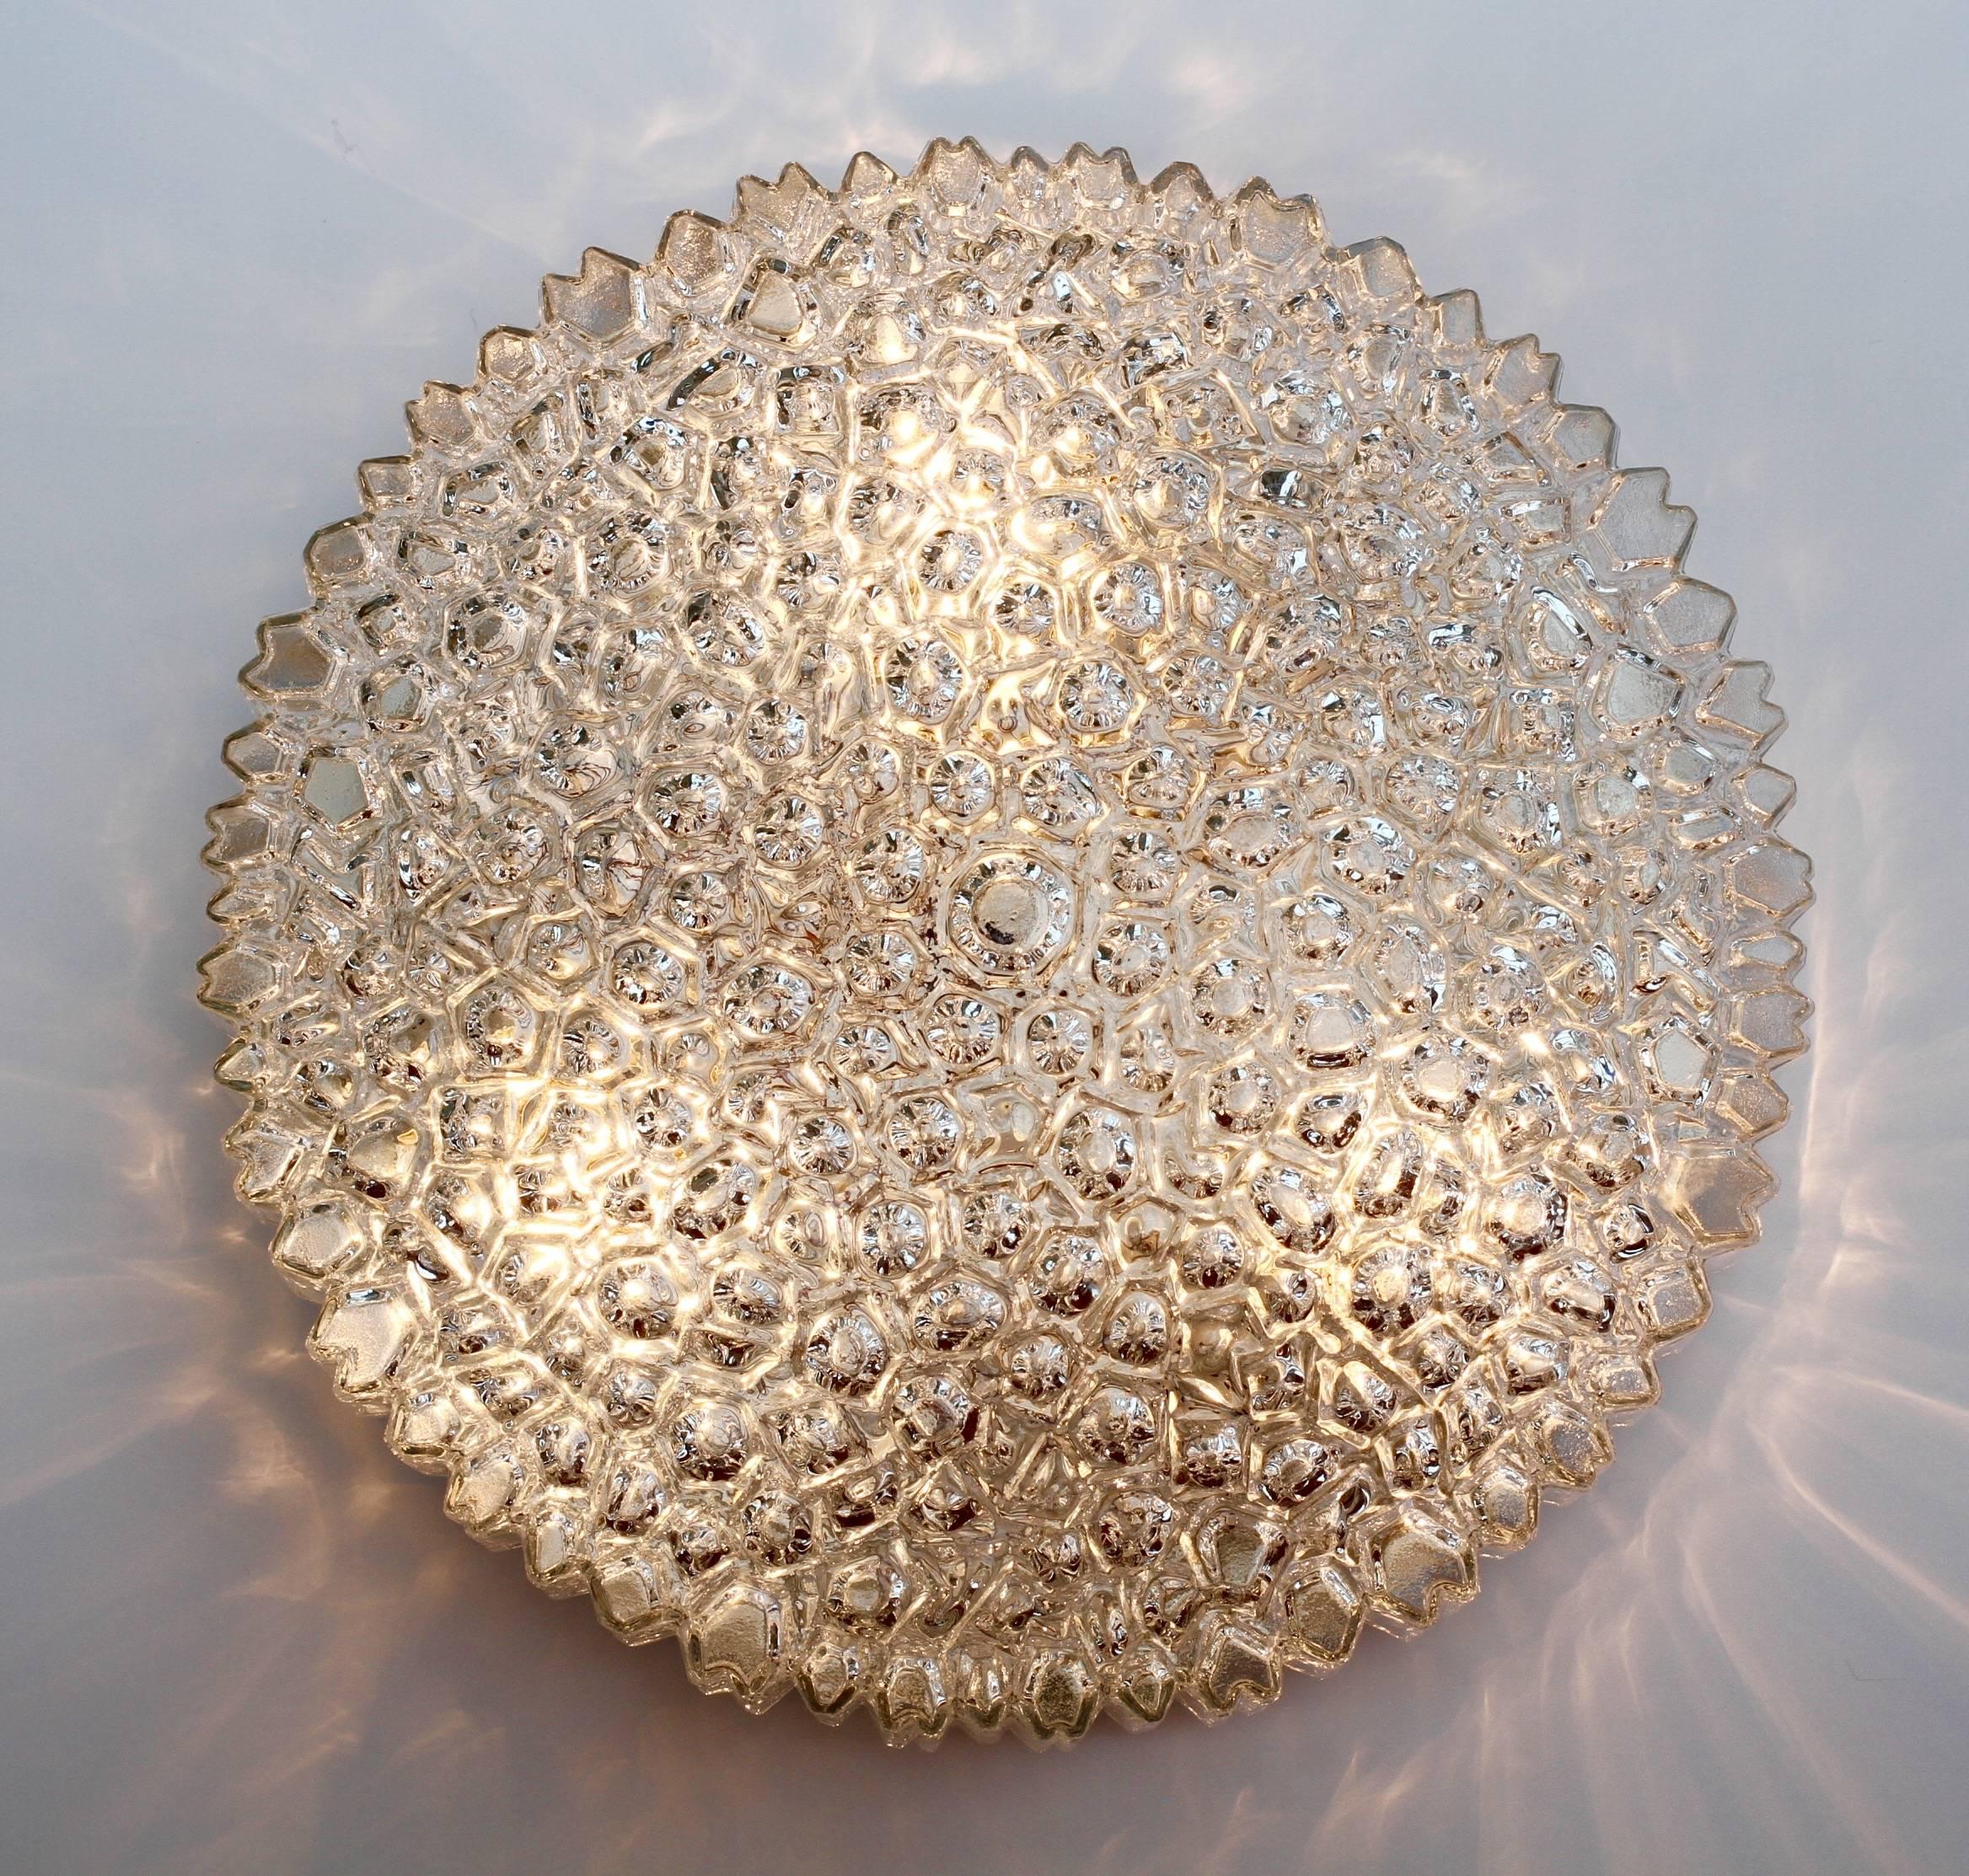 One of a pair of large 40cm (16 inch) flush mount light fixture by Glashütte Limburg, circa 1970s. Featuring a wonderful mouth blown, molded and textured clear glass shade resembling ice crystals. This mid-century vintage lamp illuminates